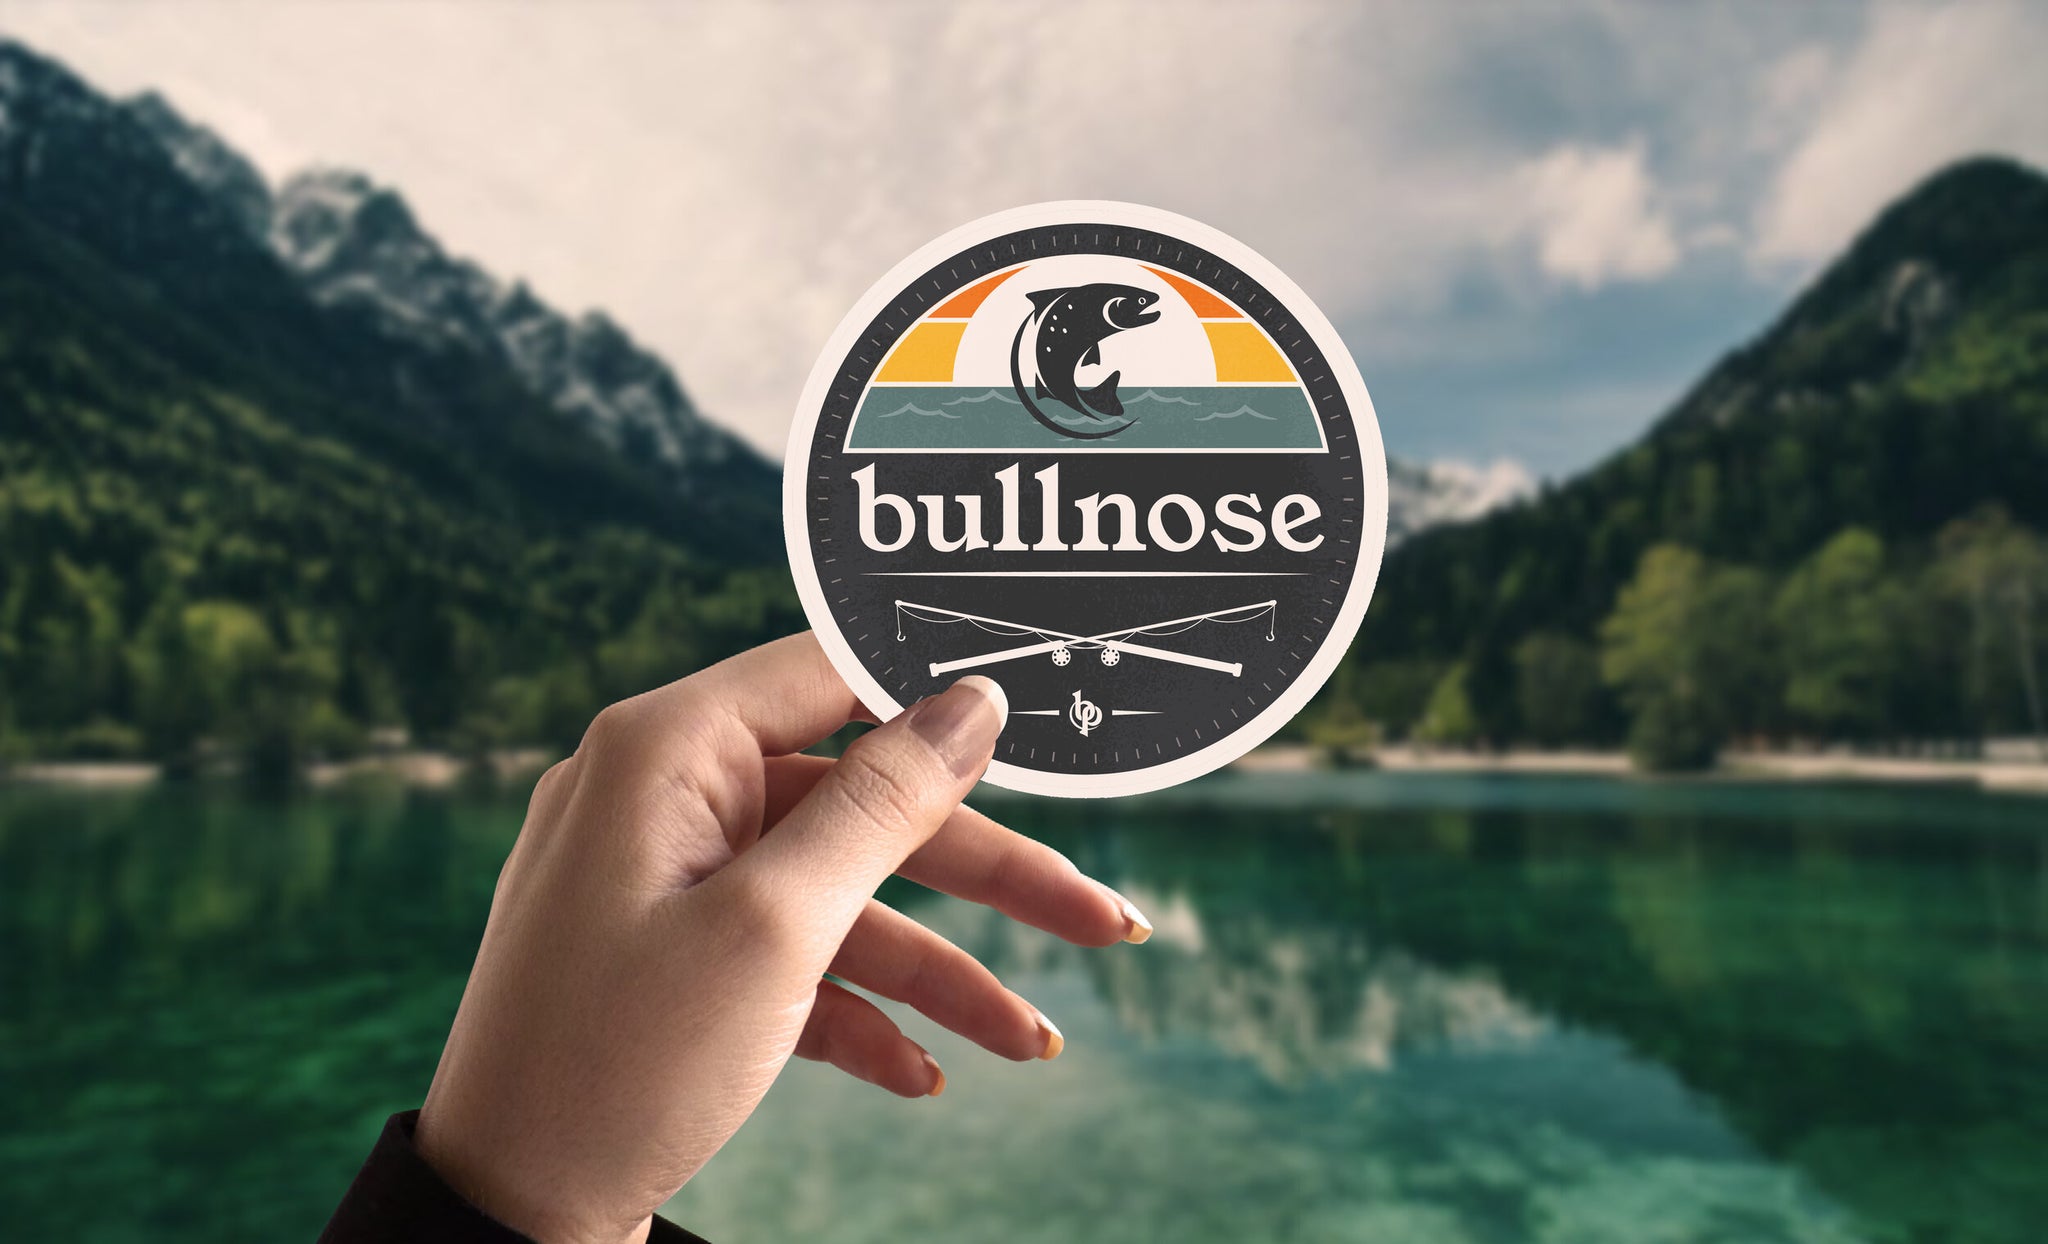 BULLNOSE PRODUCTS STICKER - CIRCLE